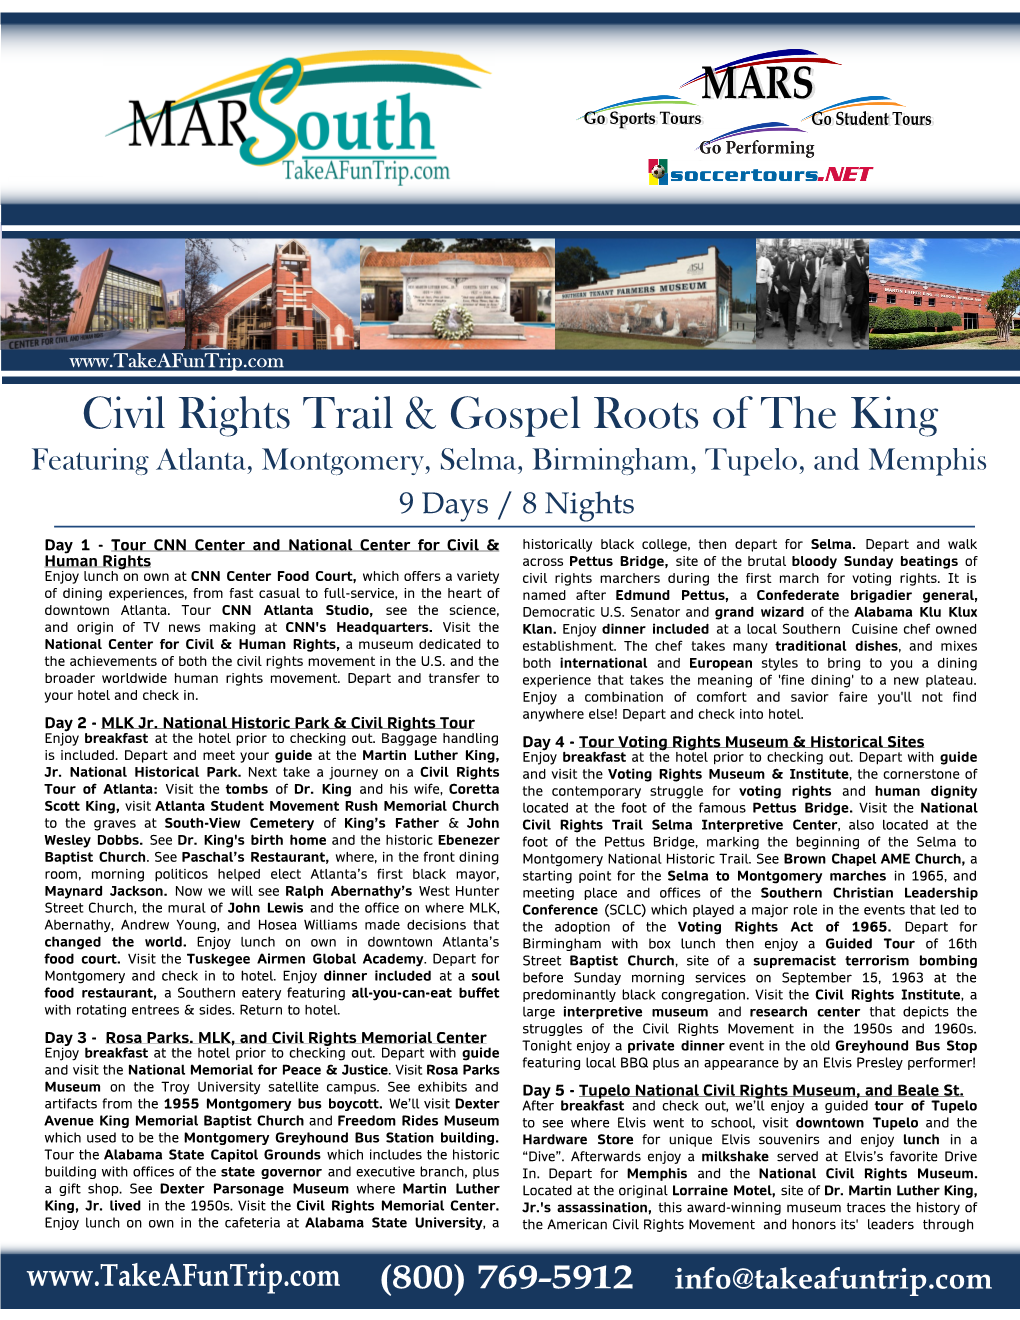 Civil Rights Trail & Gospel Roots of the King